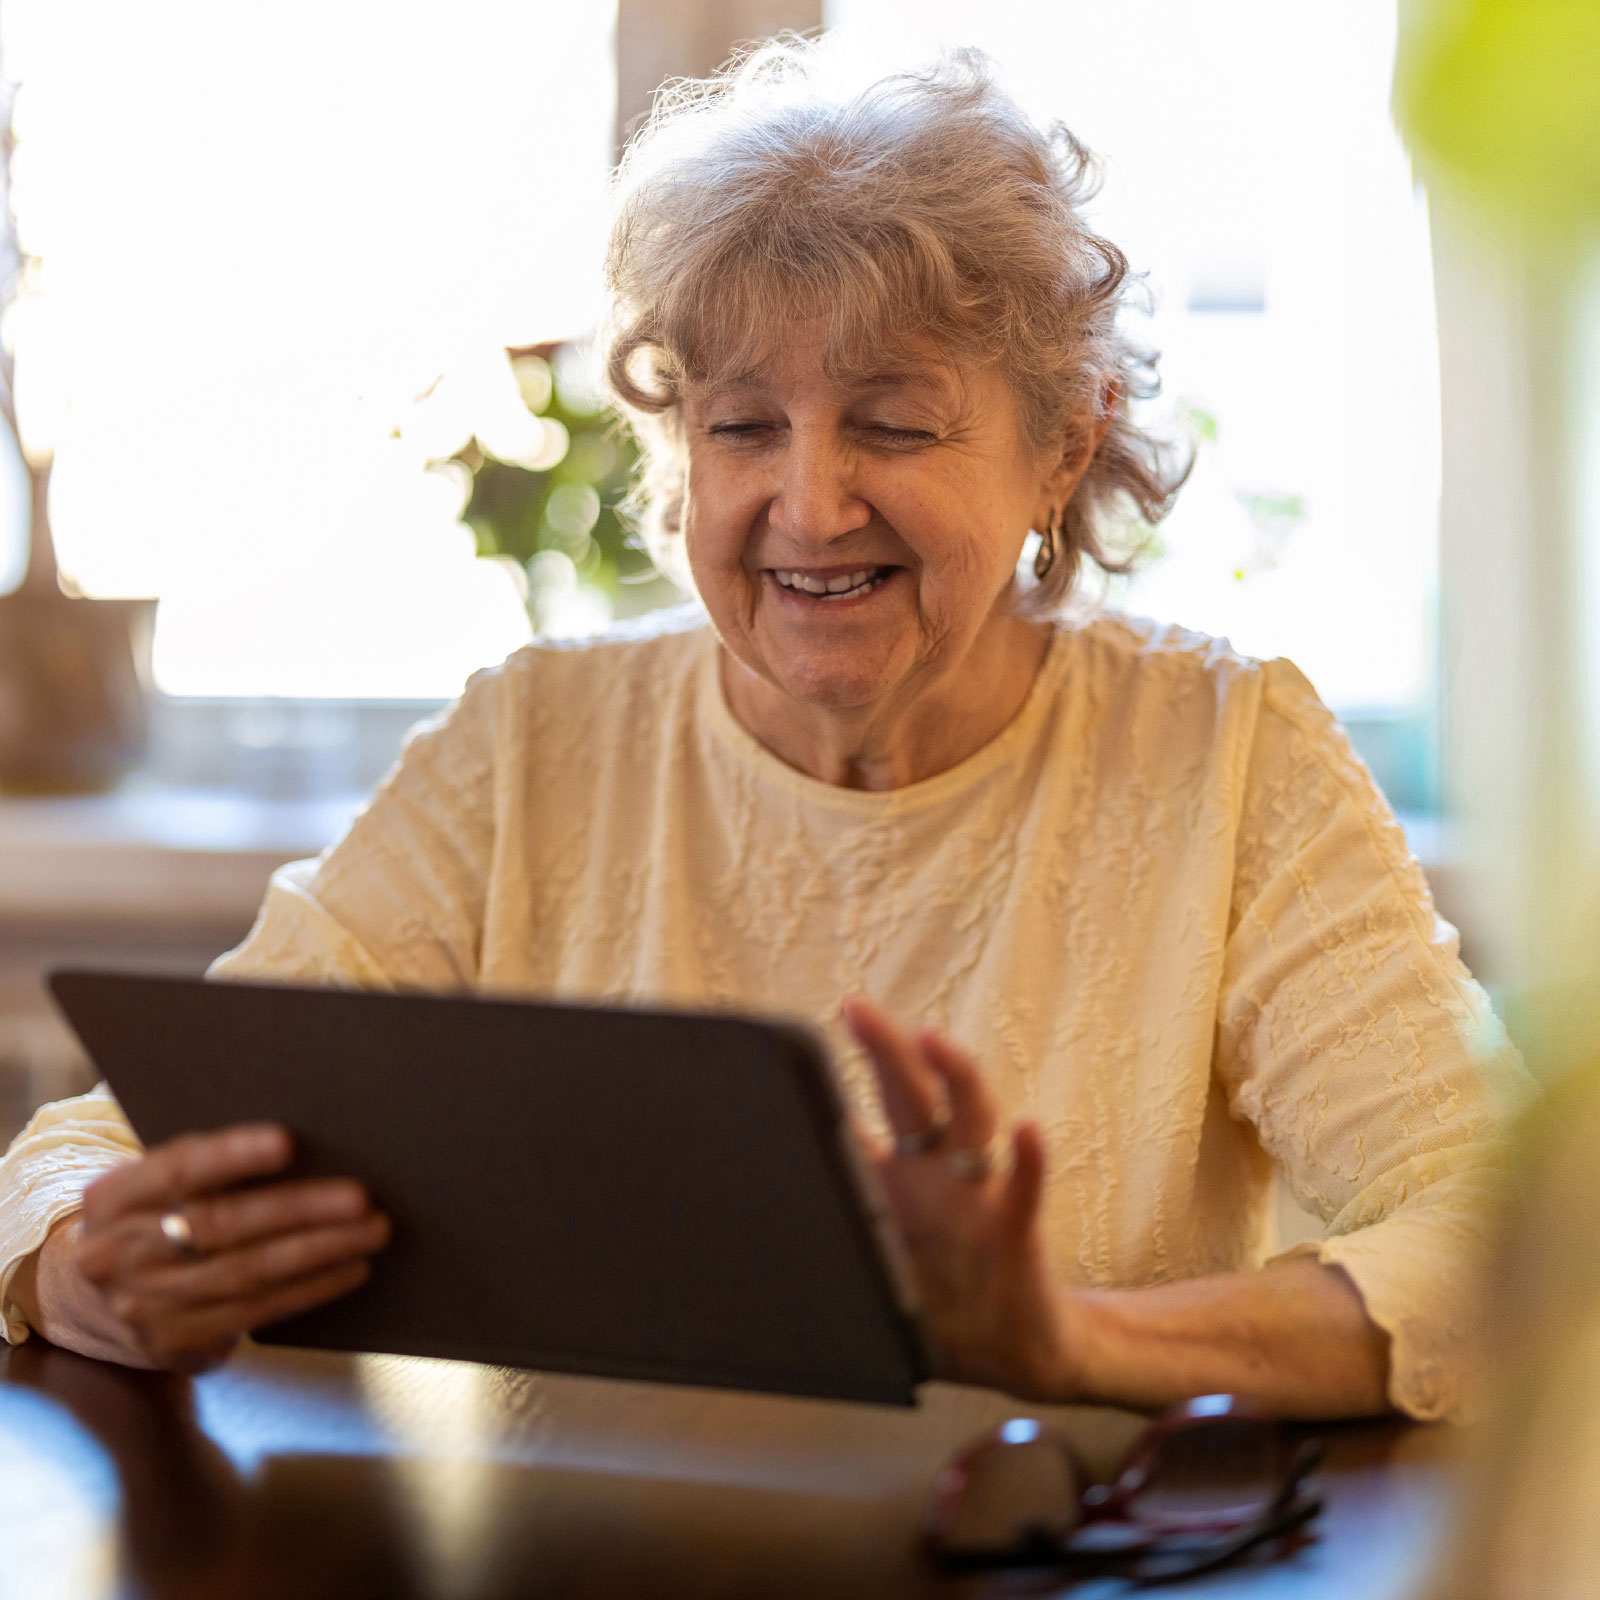 Older woman smiling using a tablet at a table.